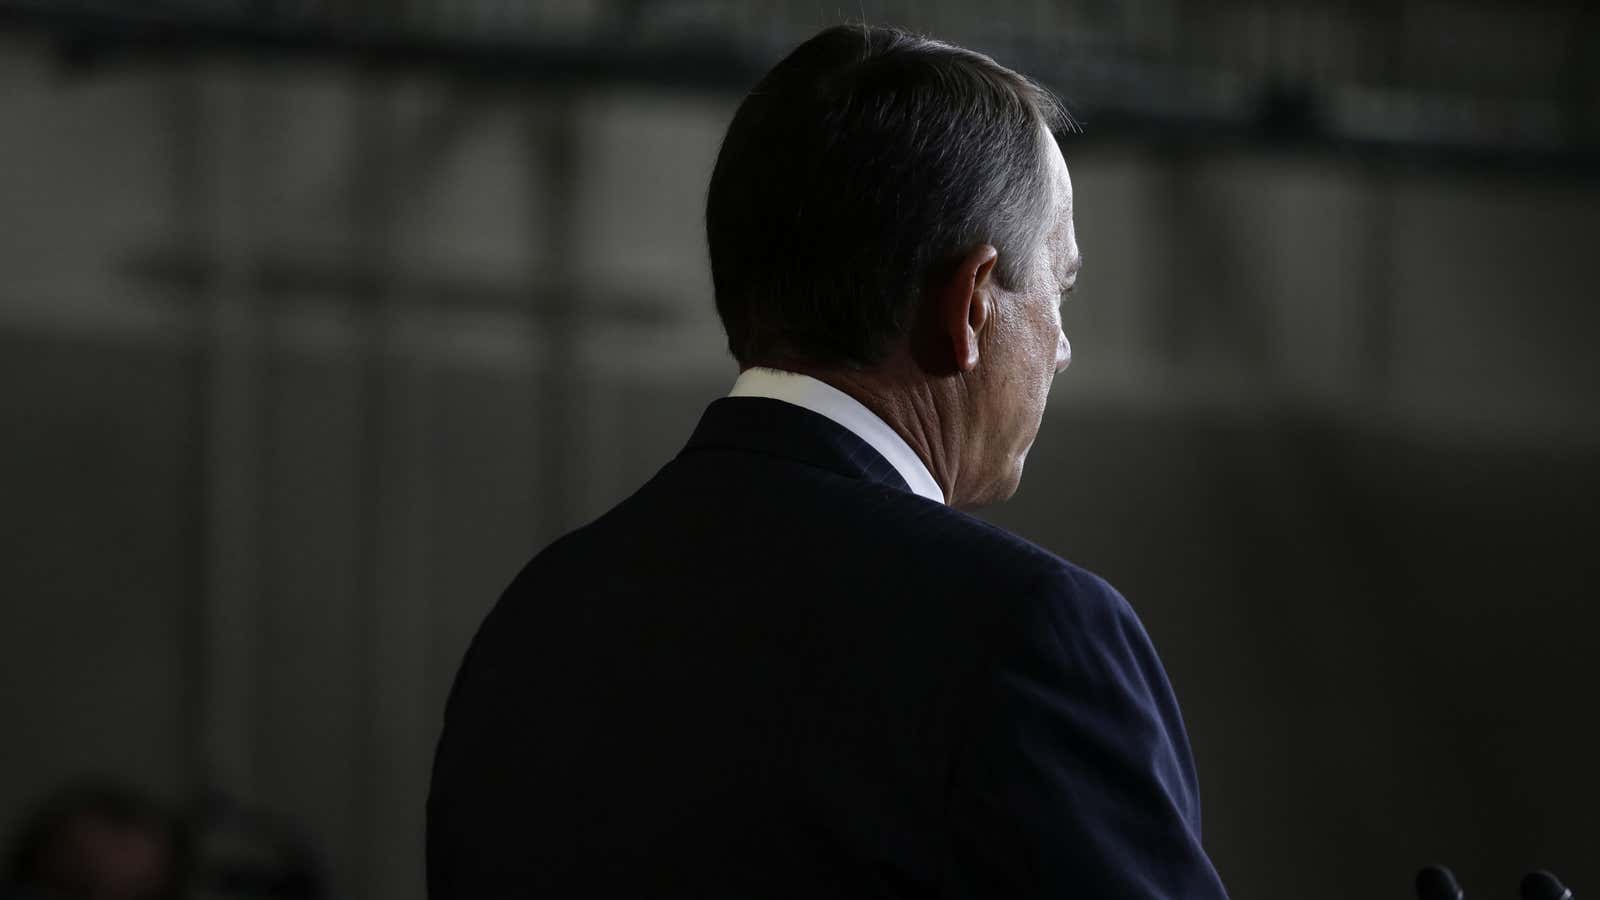 About-face by Republican House Speaker John Boehner on ‘Plan B’ vote